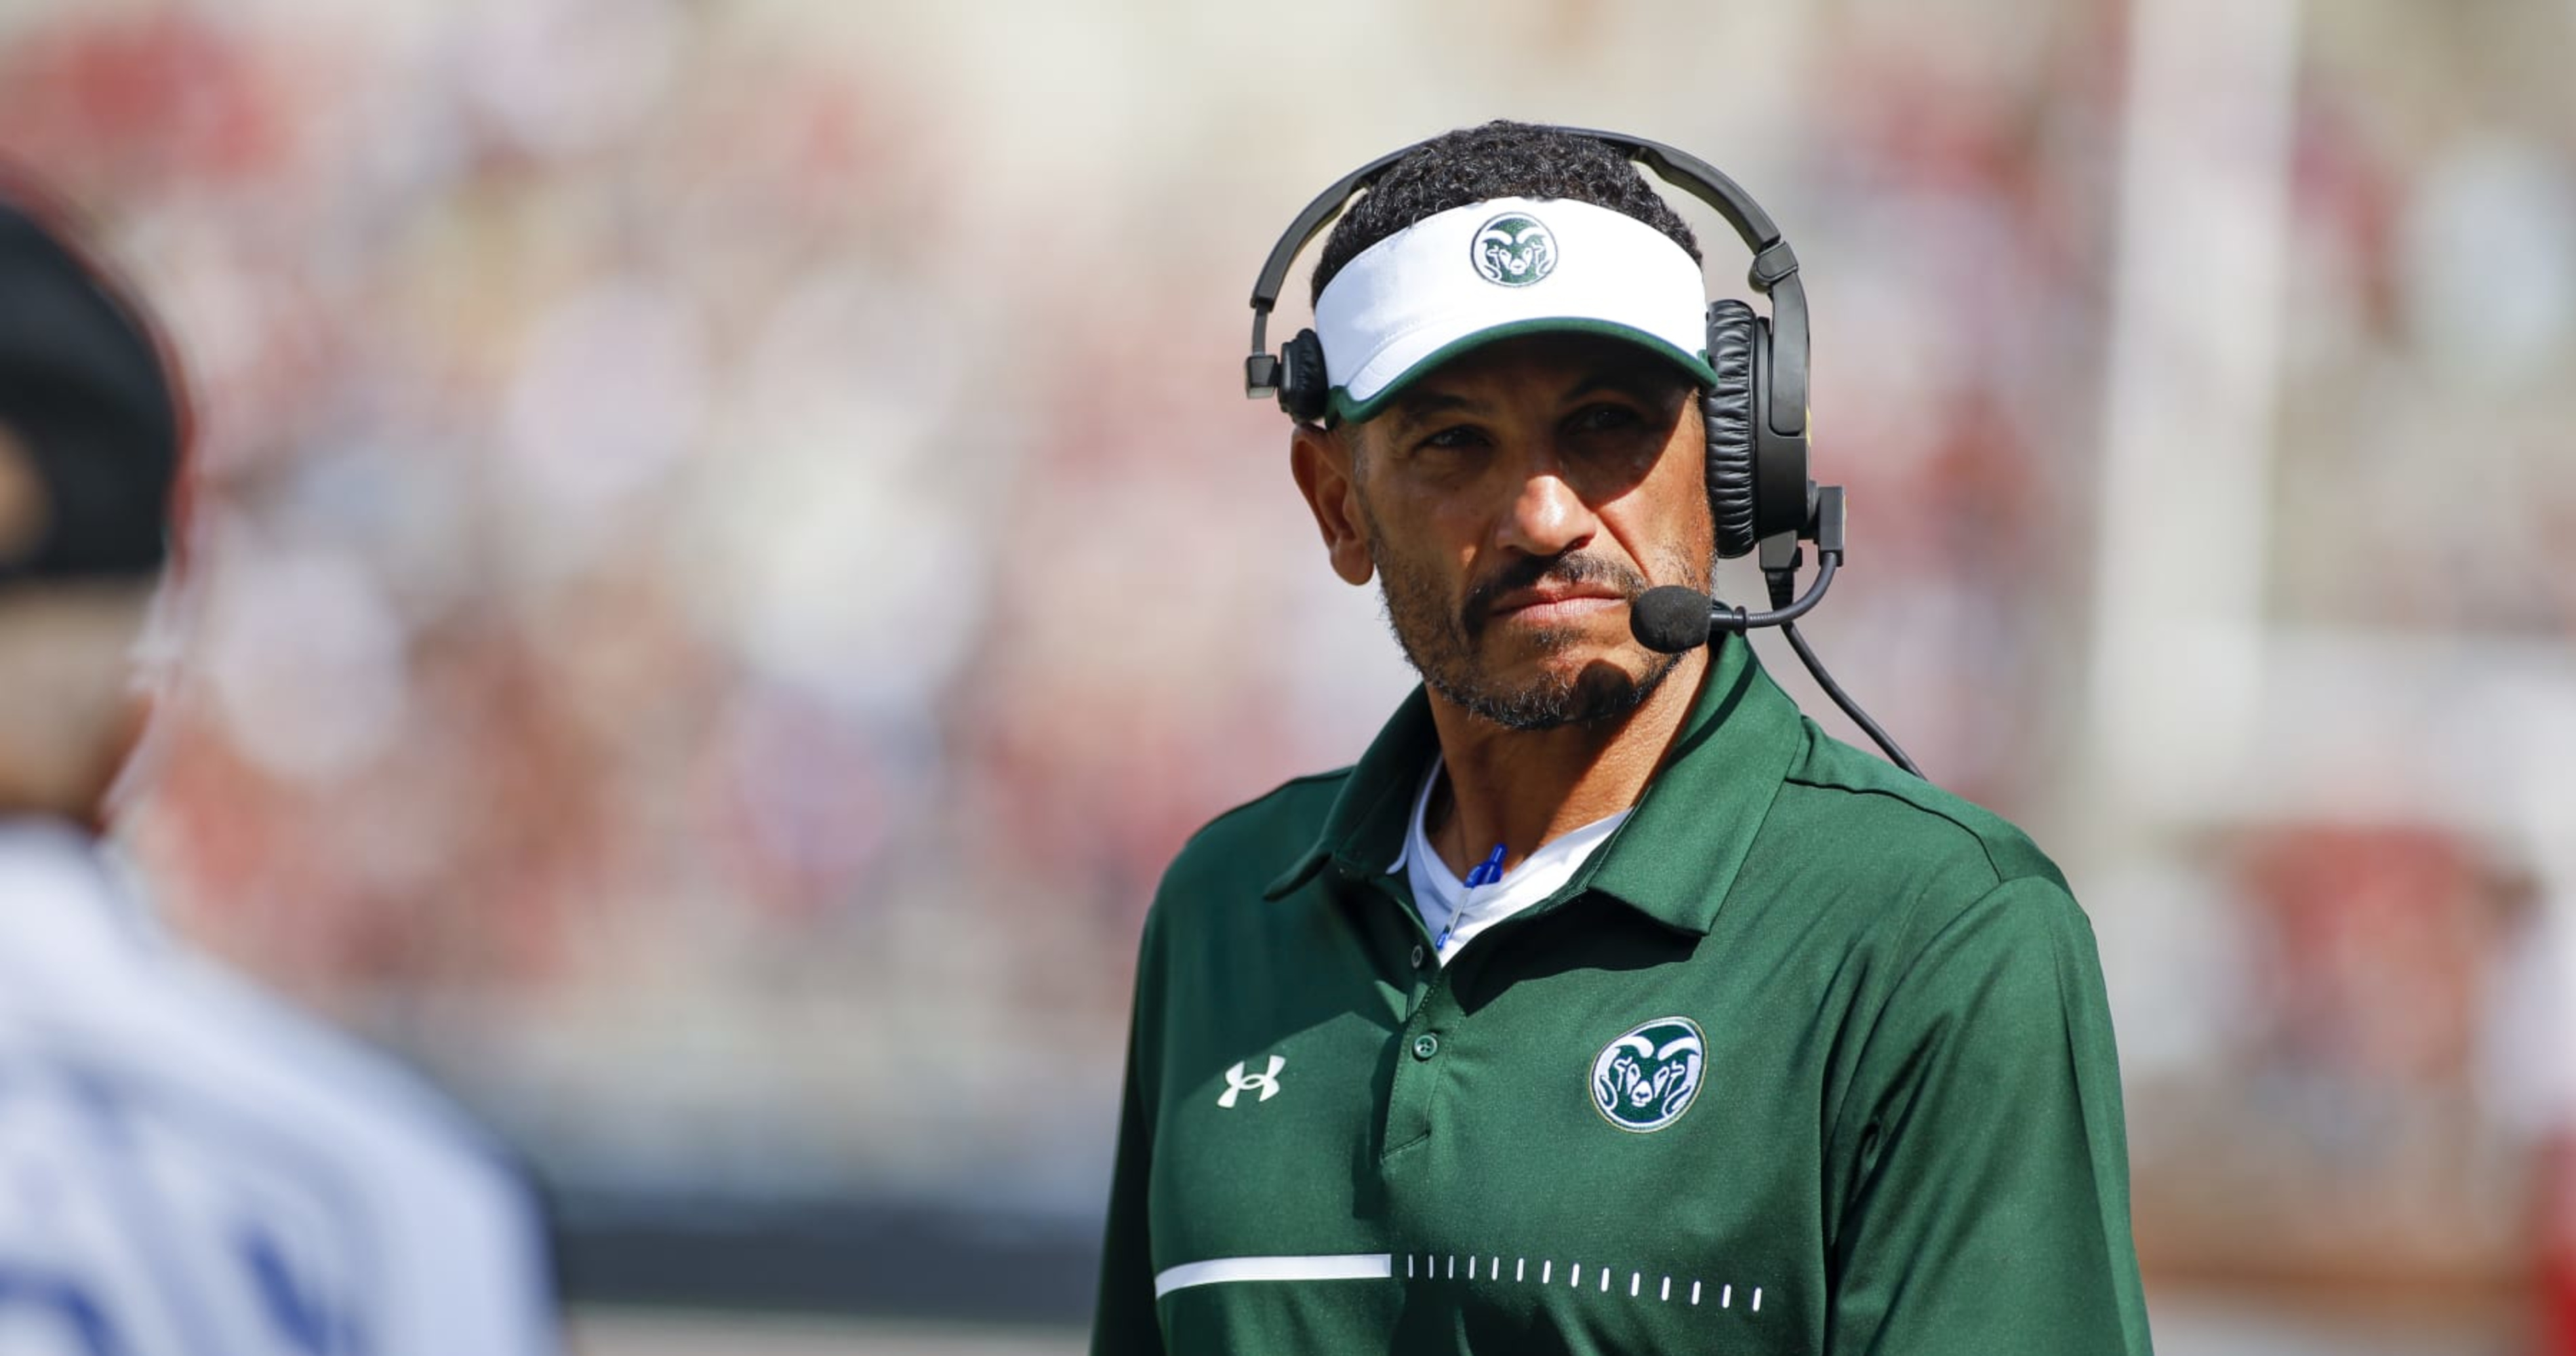 Jay Norvell 'Wanted to Send a Message' to CSU Players With Deion Sanders Shade